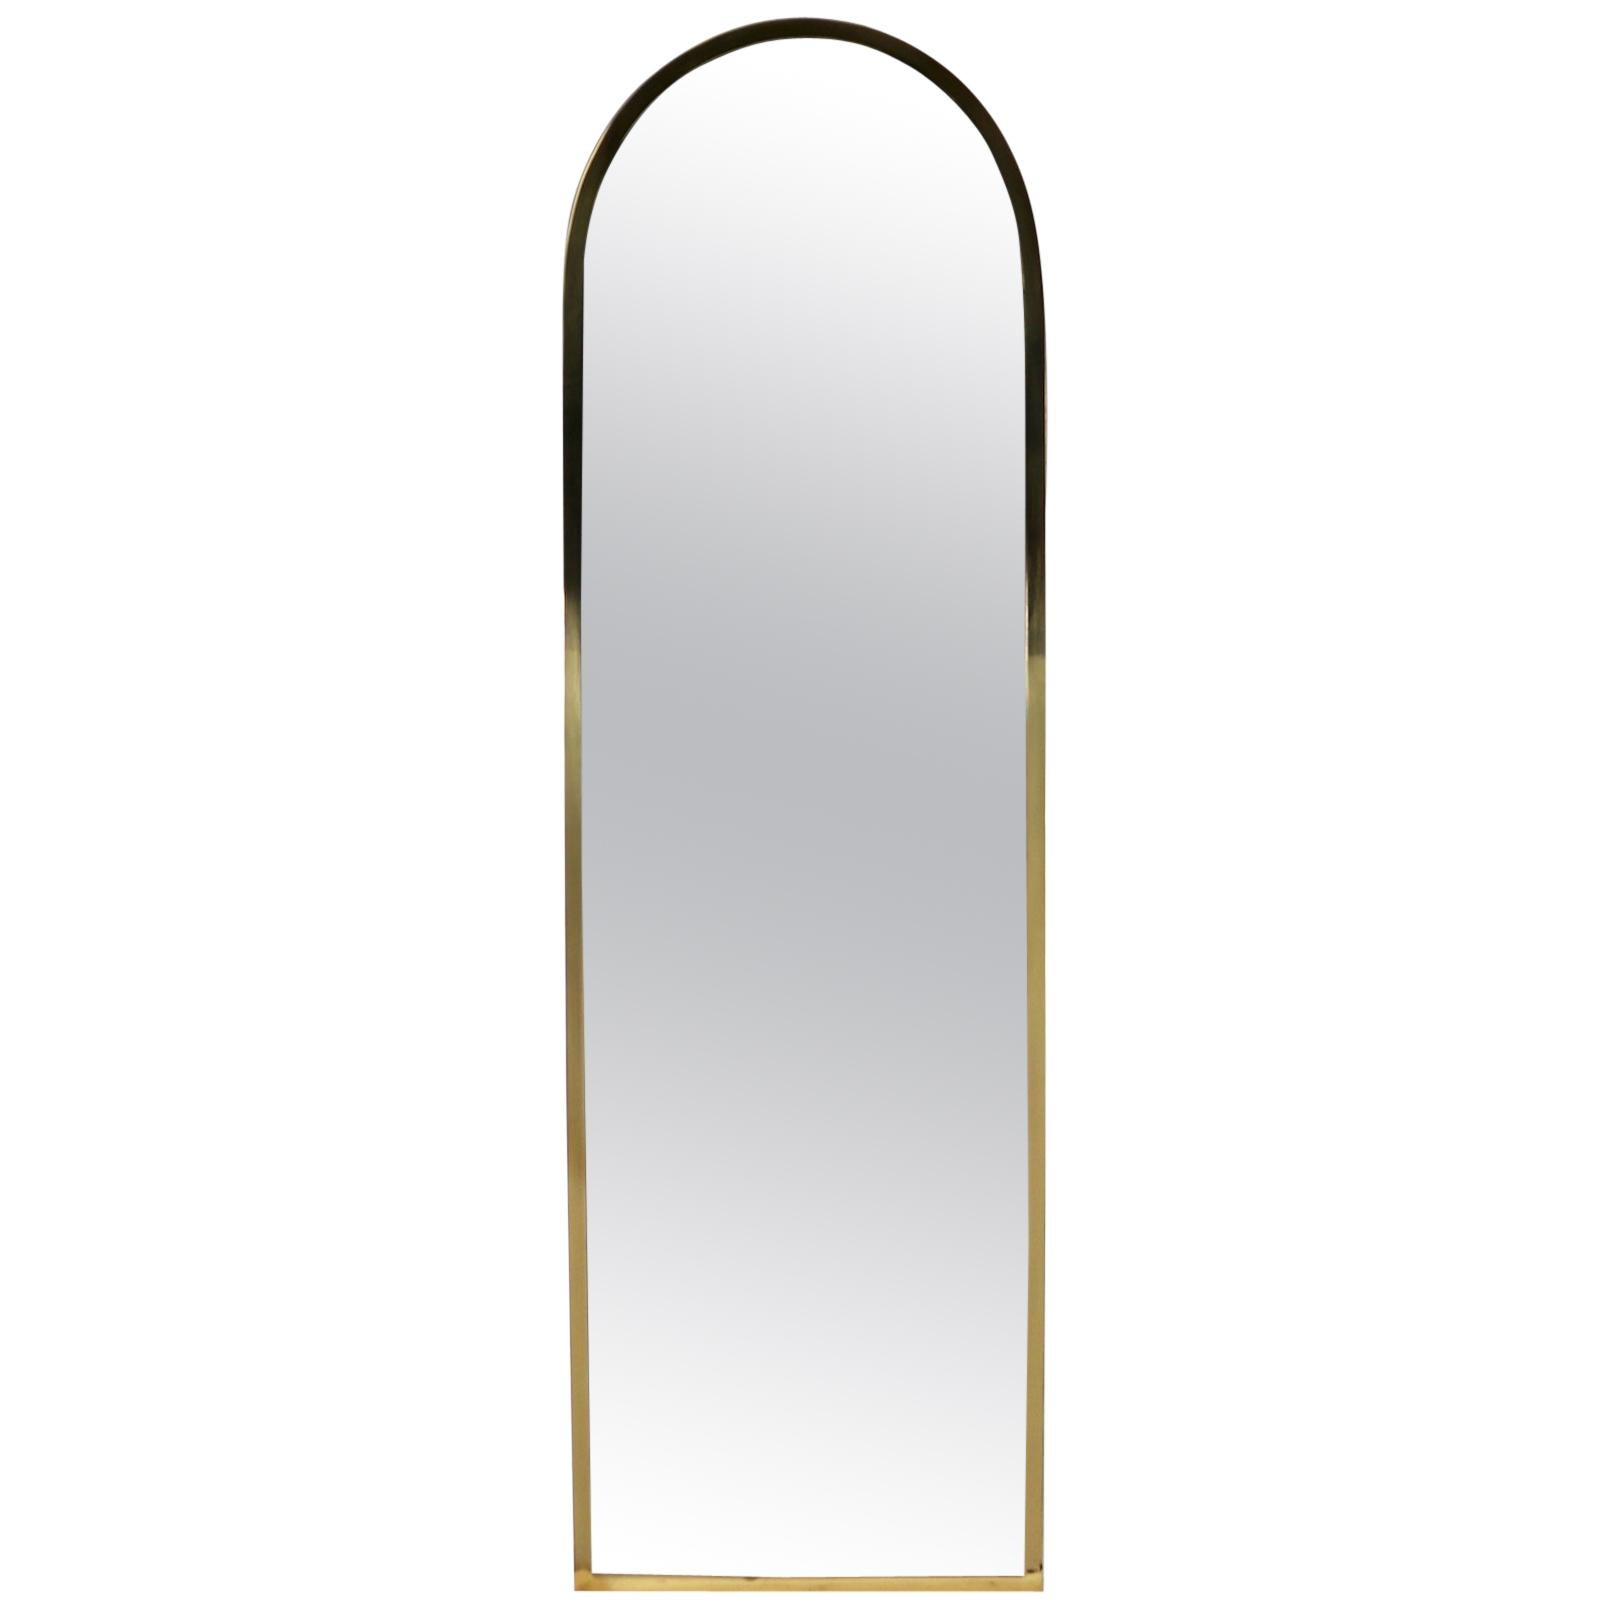 Brass Frame Tombstone Form Mirror Made in Italy Attributed to Mastercraft